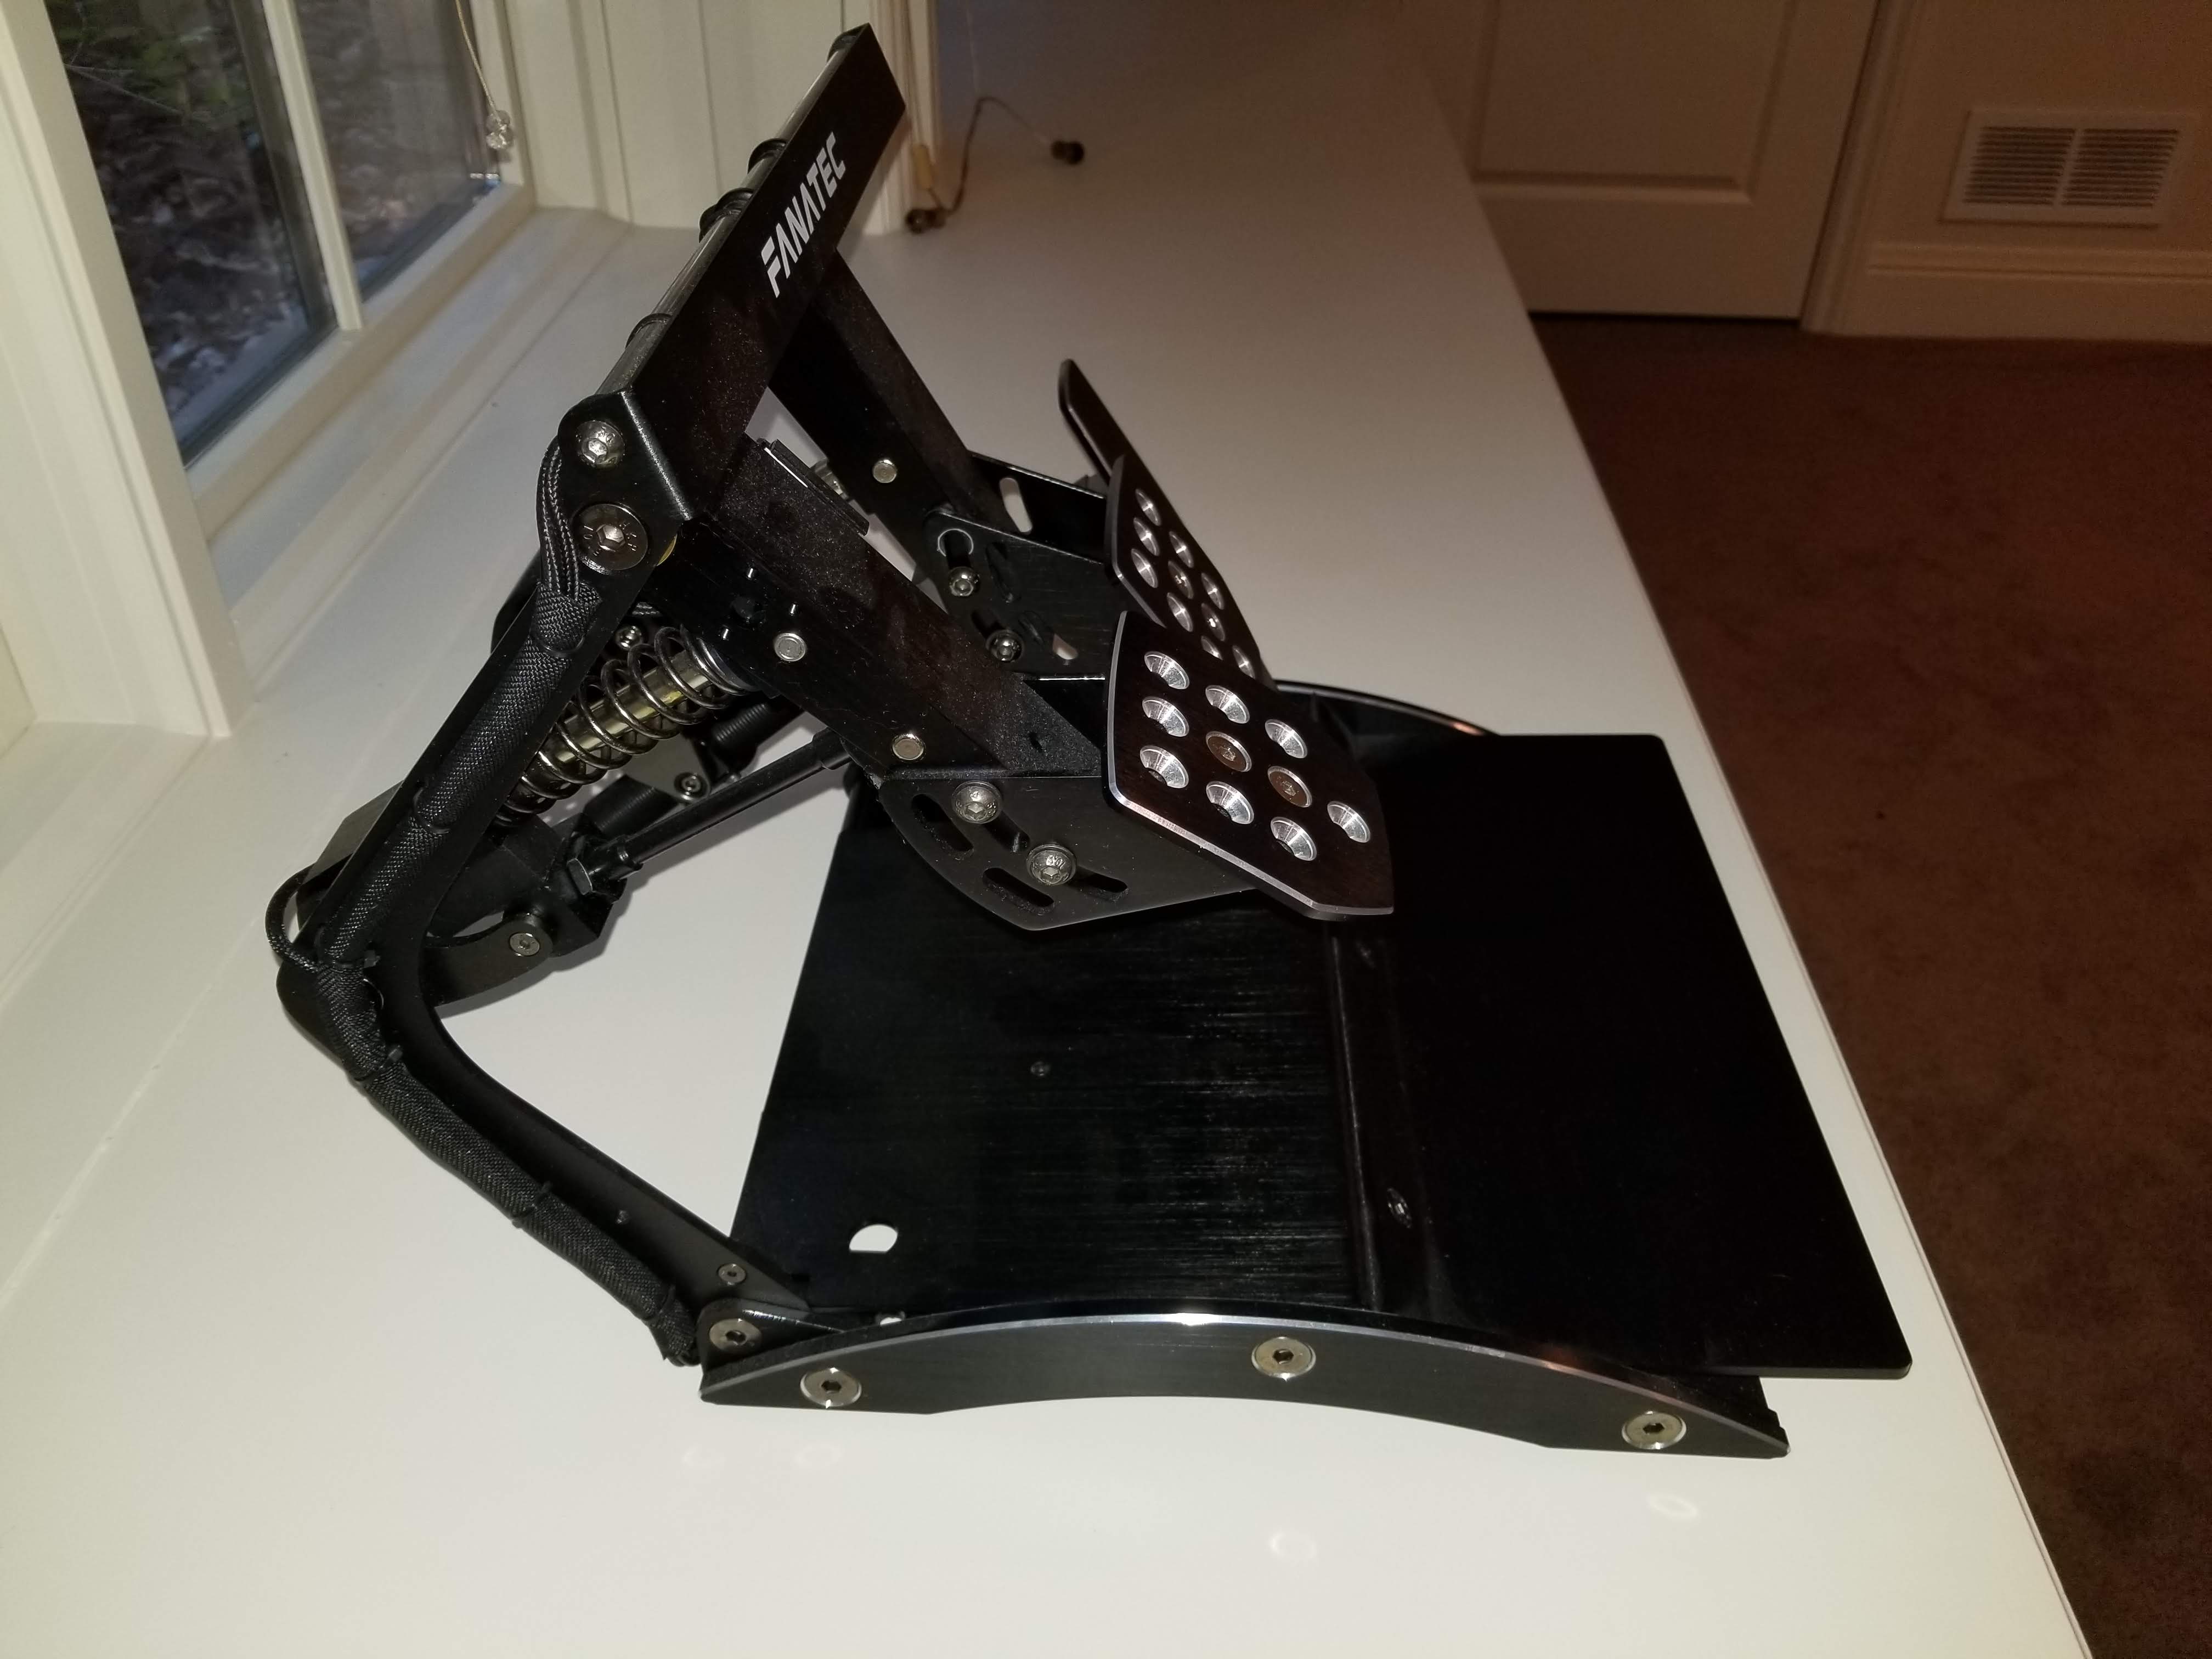 Sell - [For Sale] Fanatec ClubSport Pedals V3 inverted - Less than